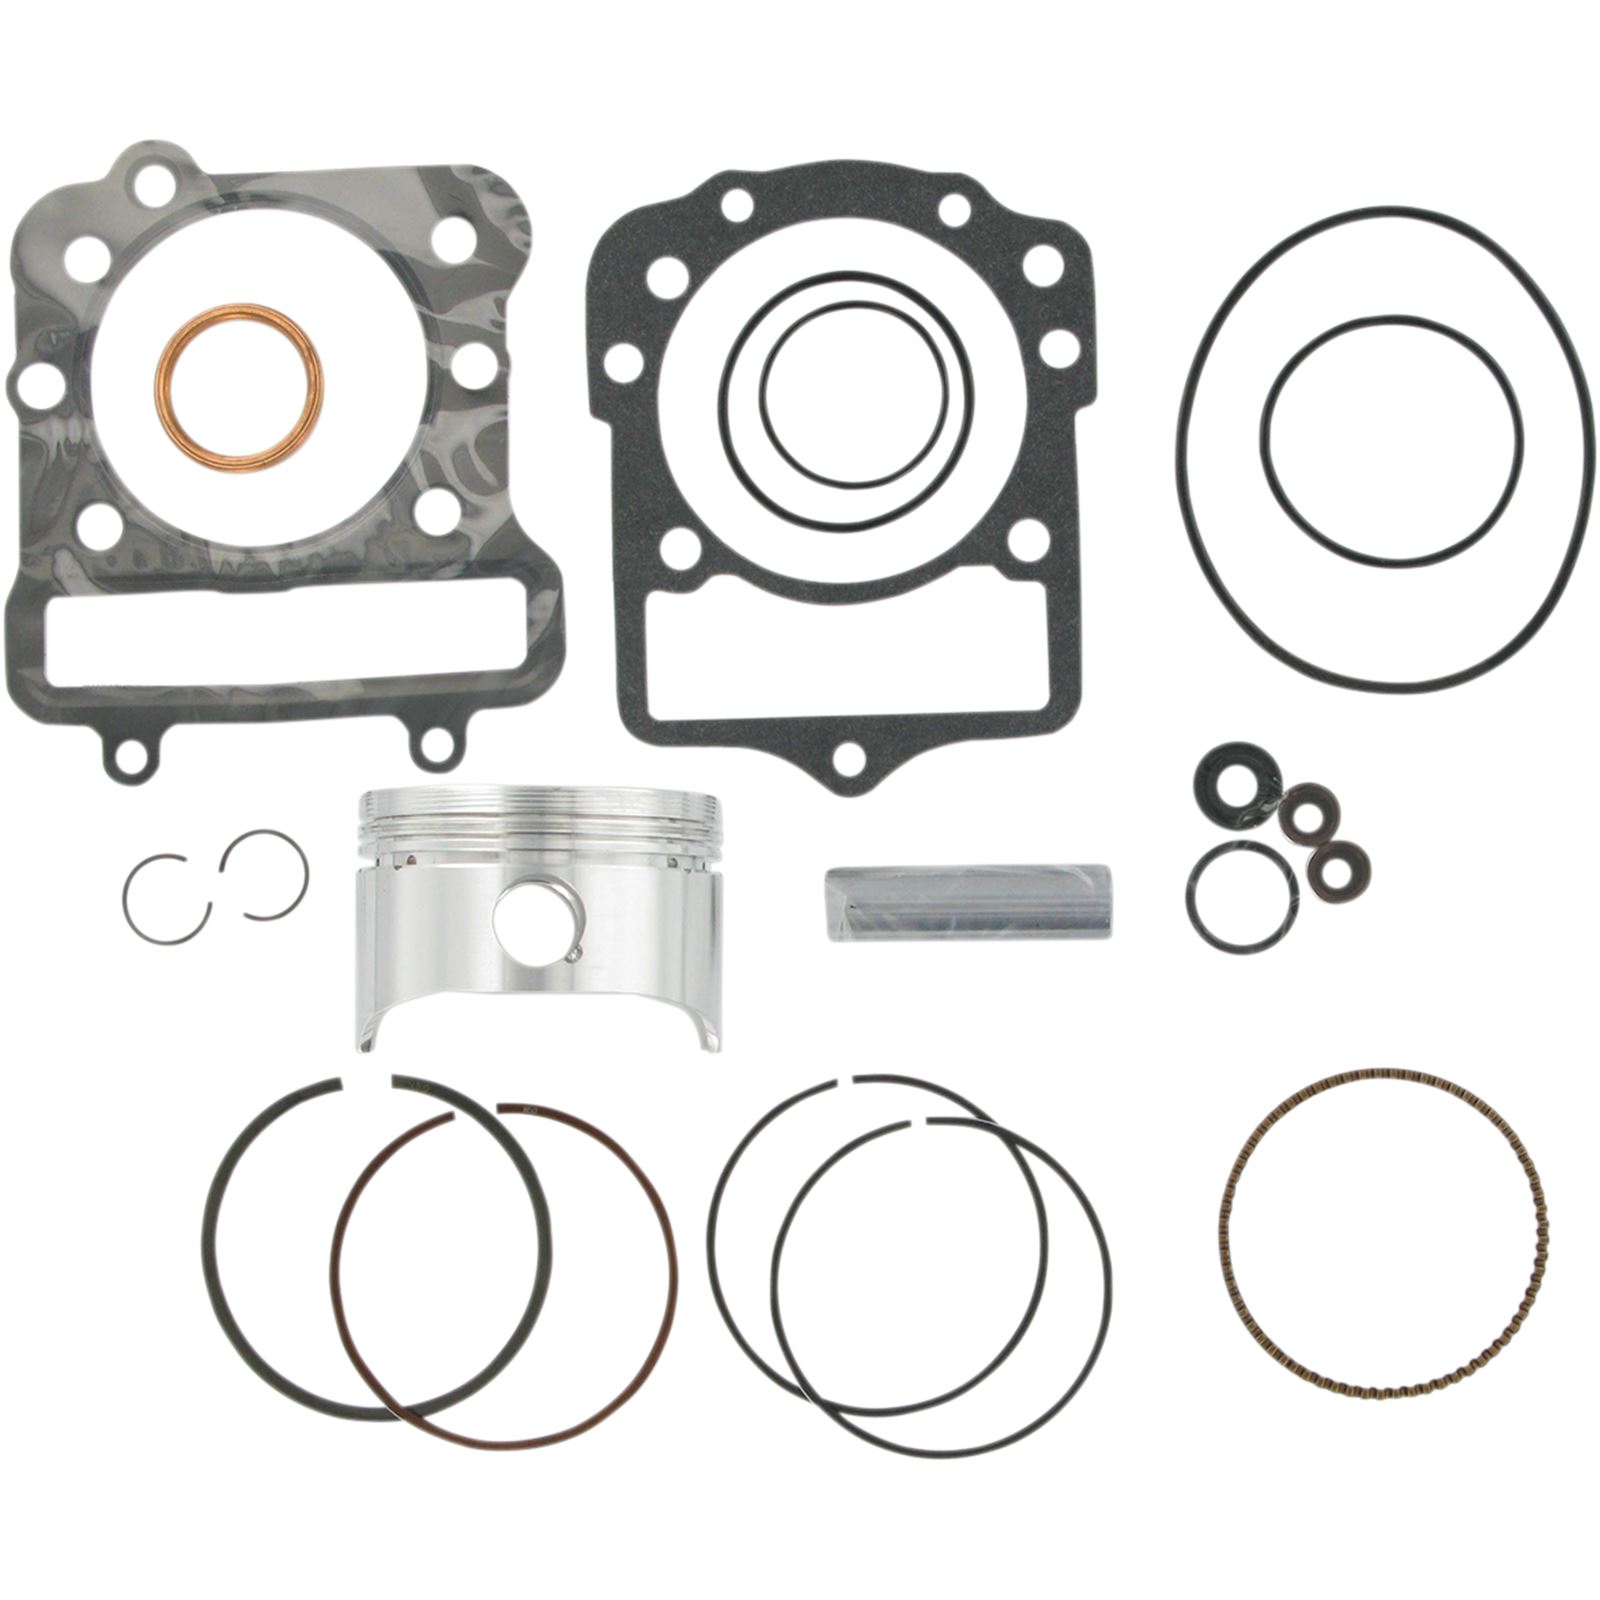 Wiseco PK1050 76.00 mm 8.6:1 Compression ATV Piston Kit with Top-End Gasket Kit 